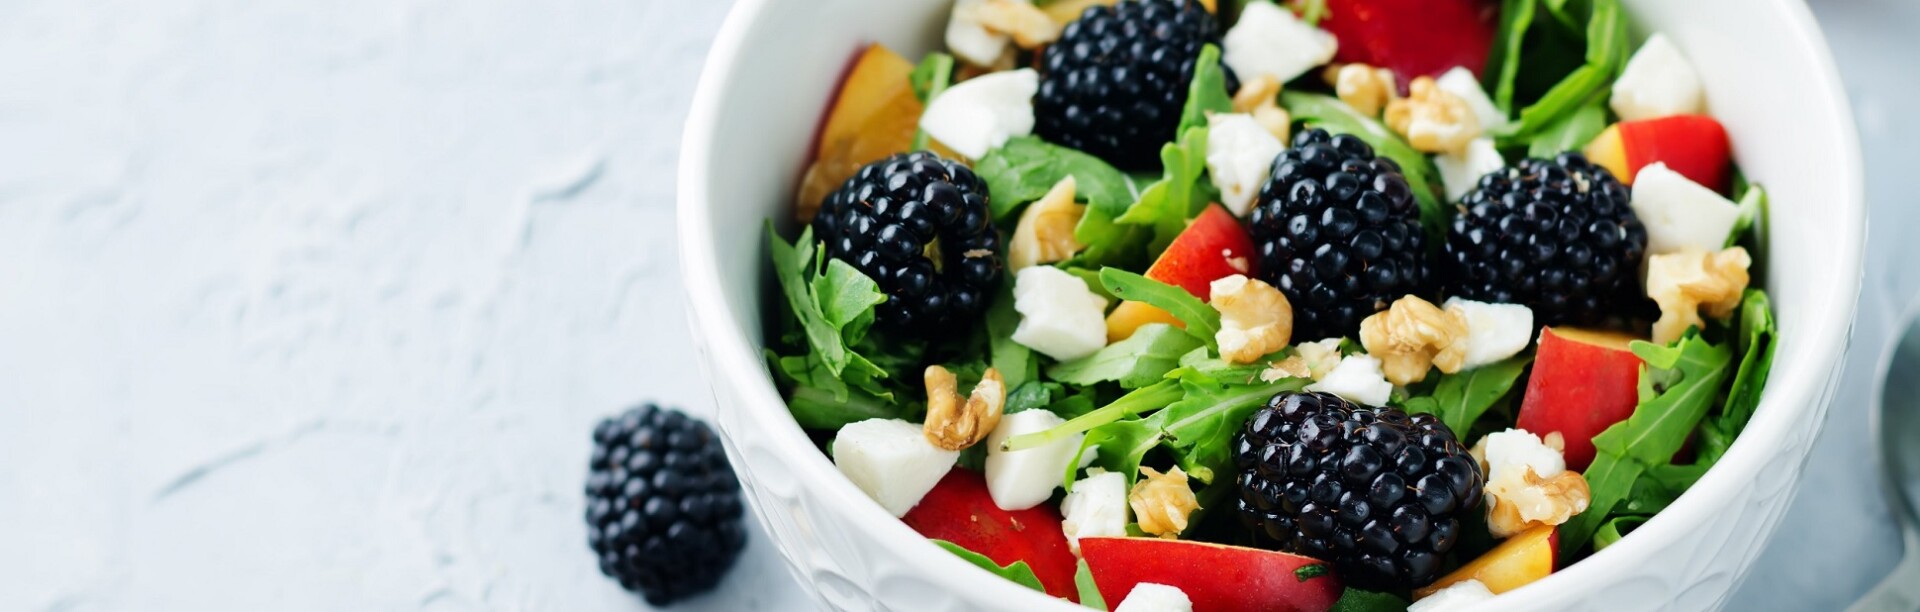 healthy summer salad with arugula and blackberries